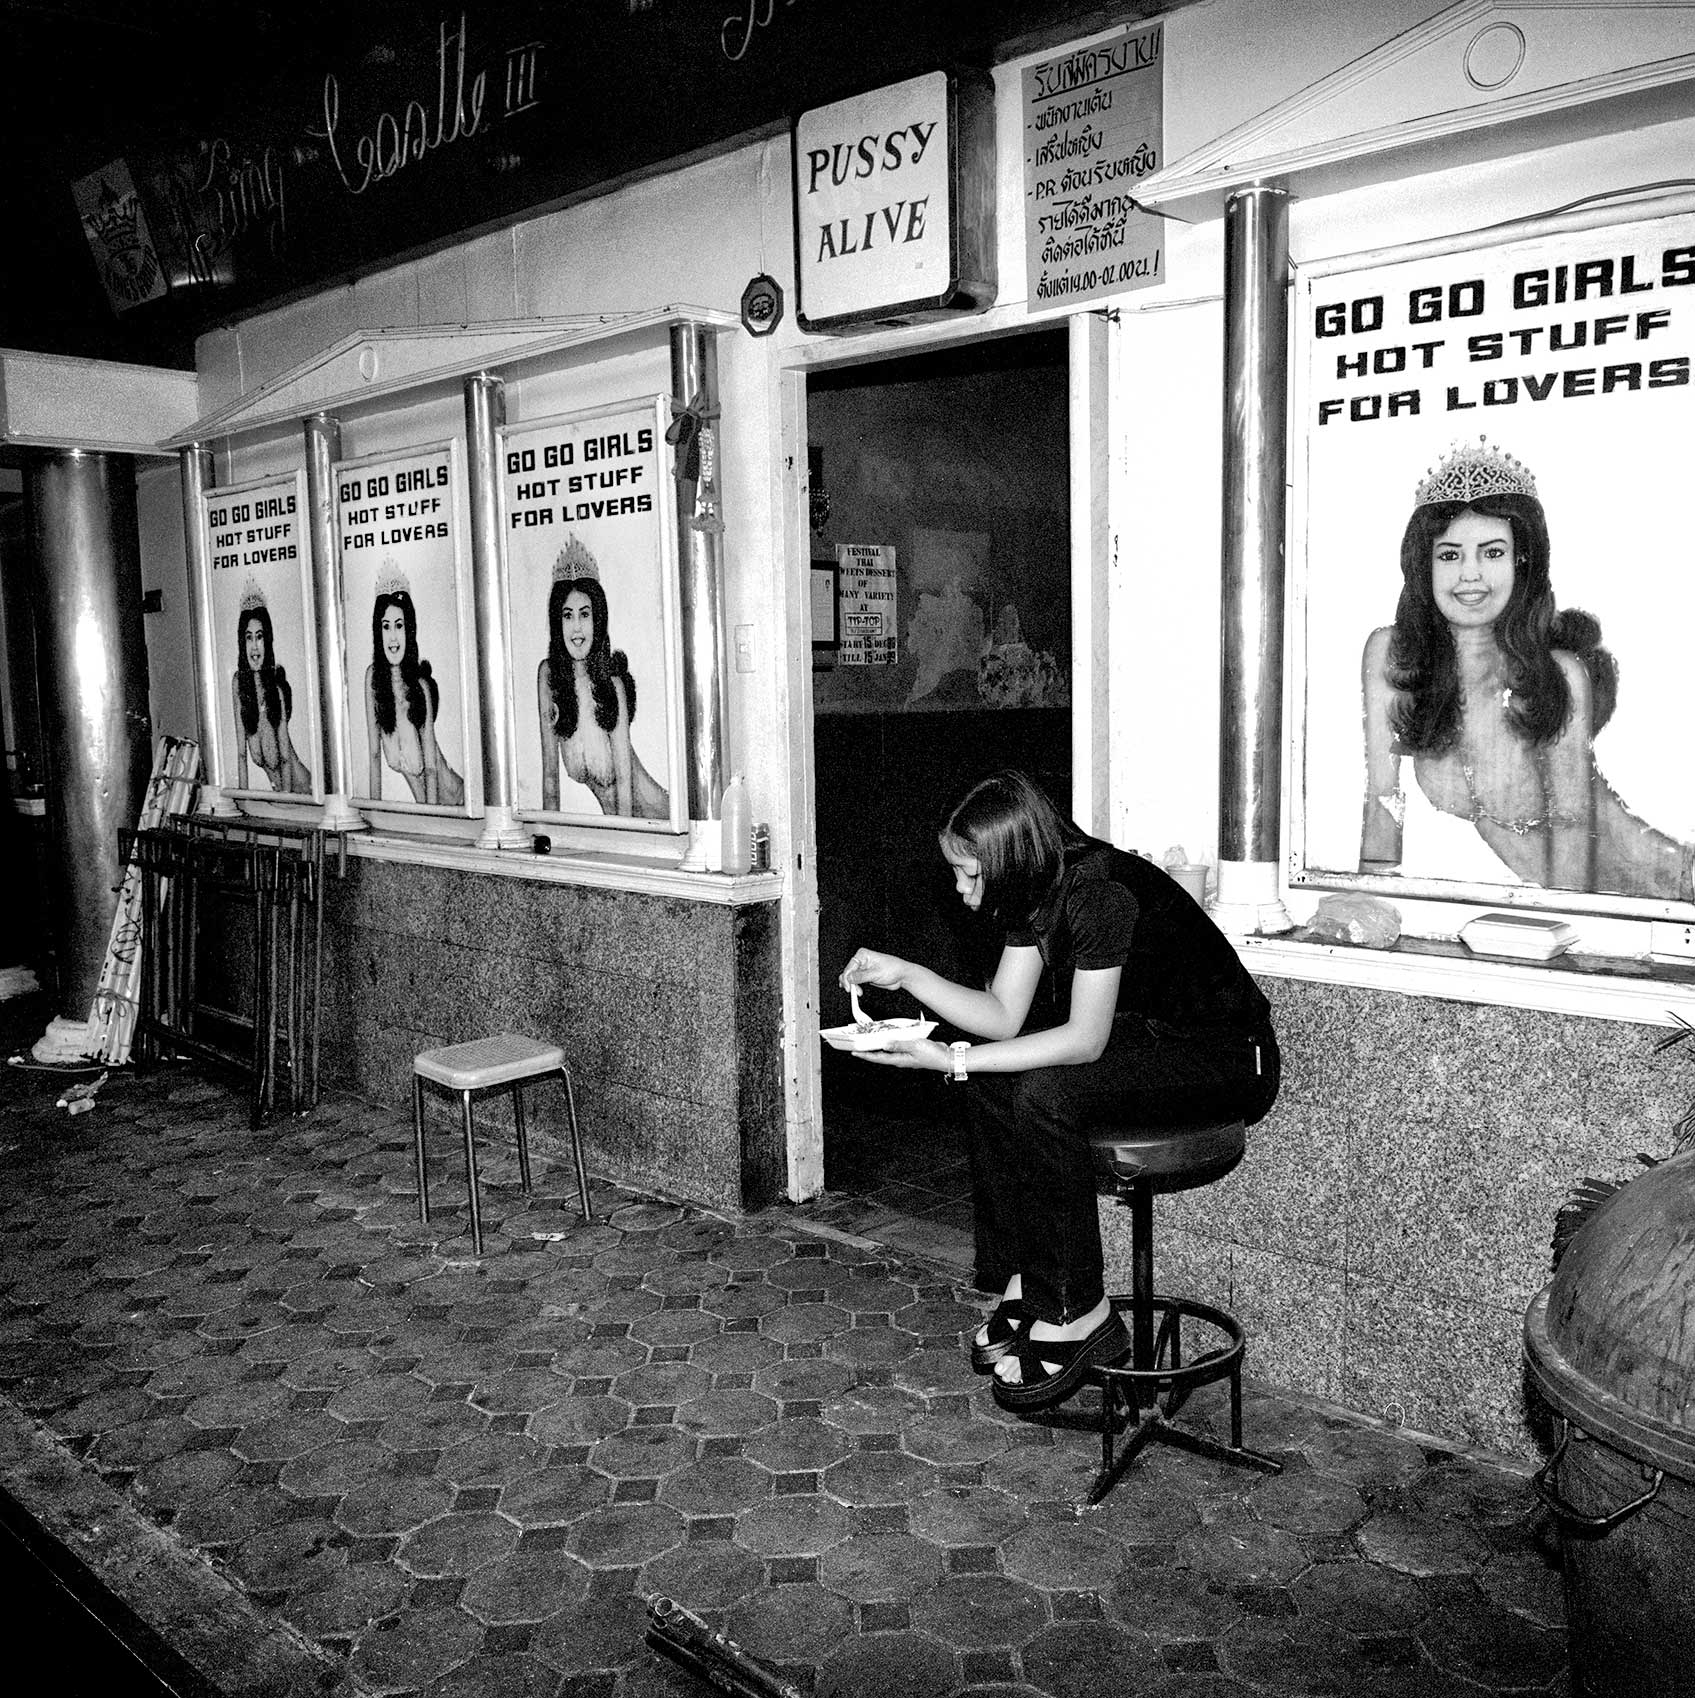 a-woman-eats-food-as-she-works-the-door-of-a-strip-club-in-bangkok-thailand